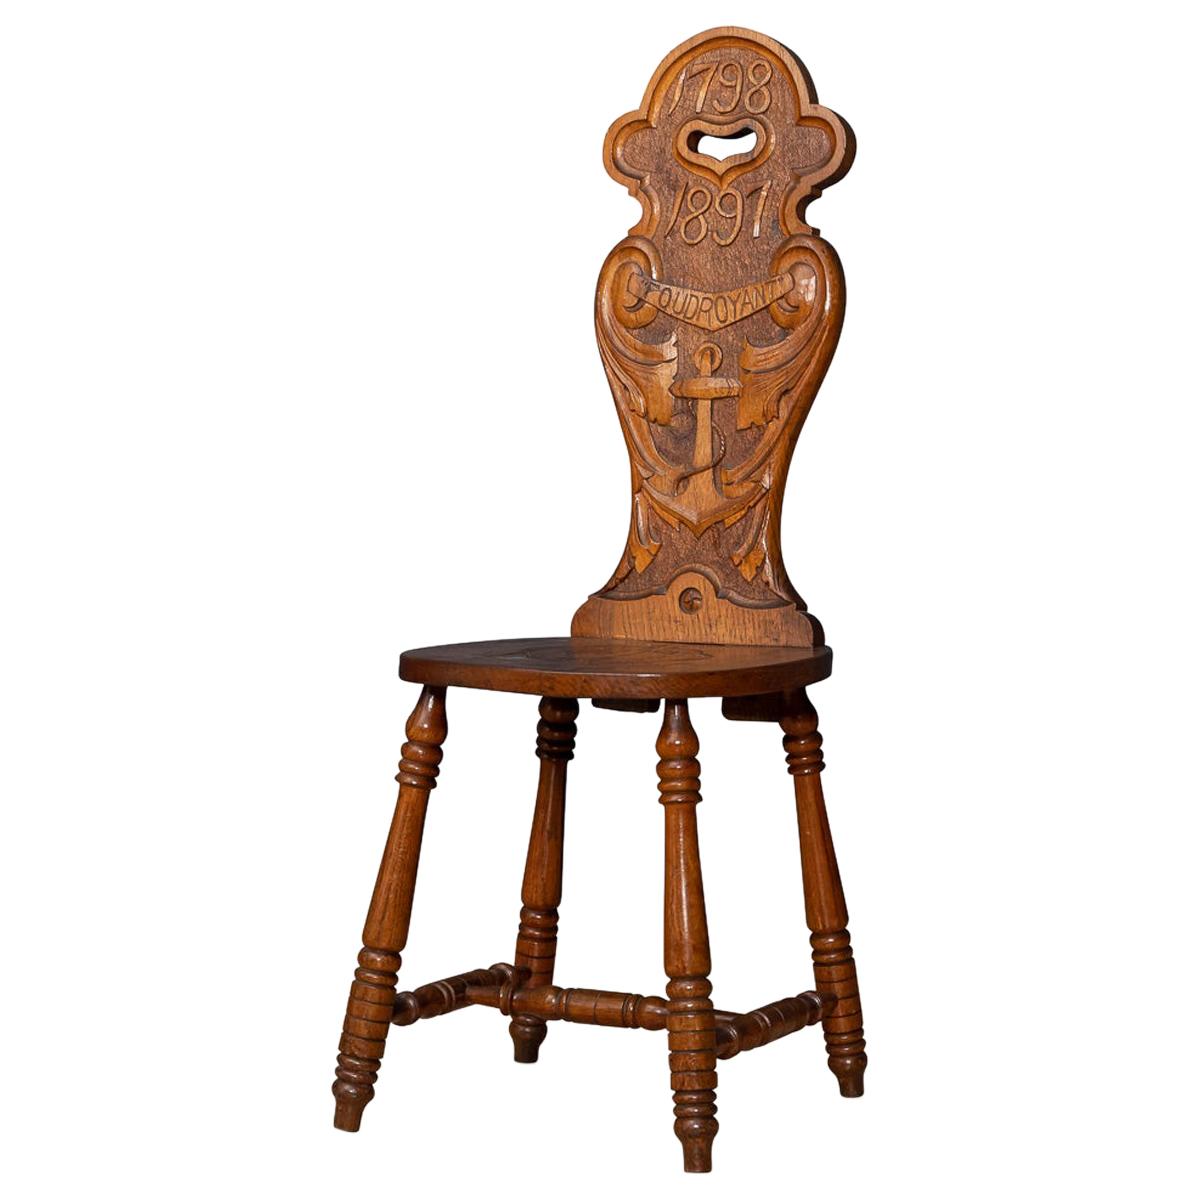 19th Century Hall Oak Chair From The Foudroyant, Lord Nelson’s Flagship